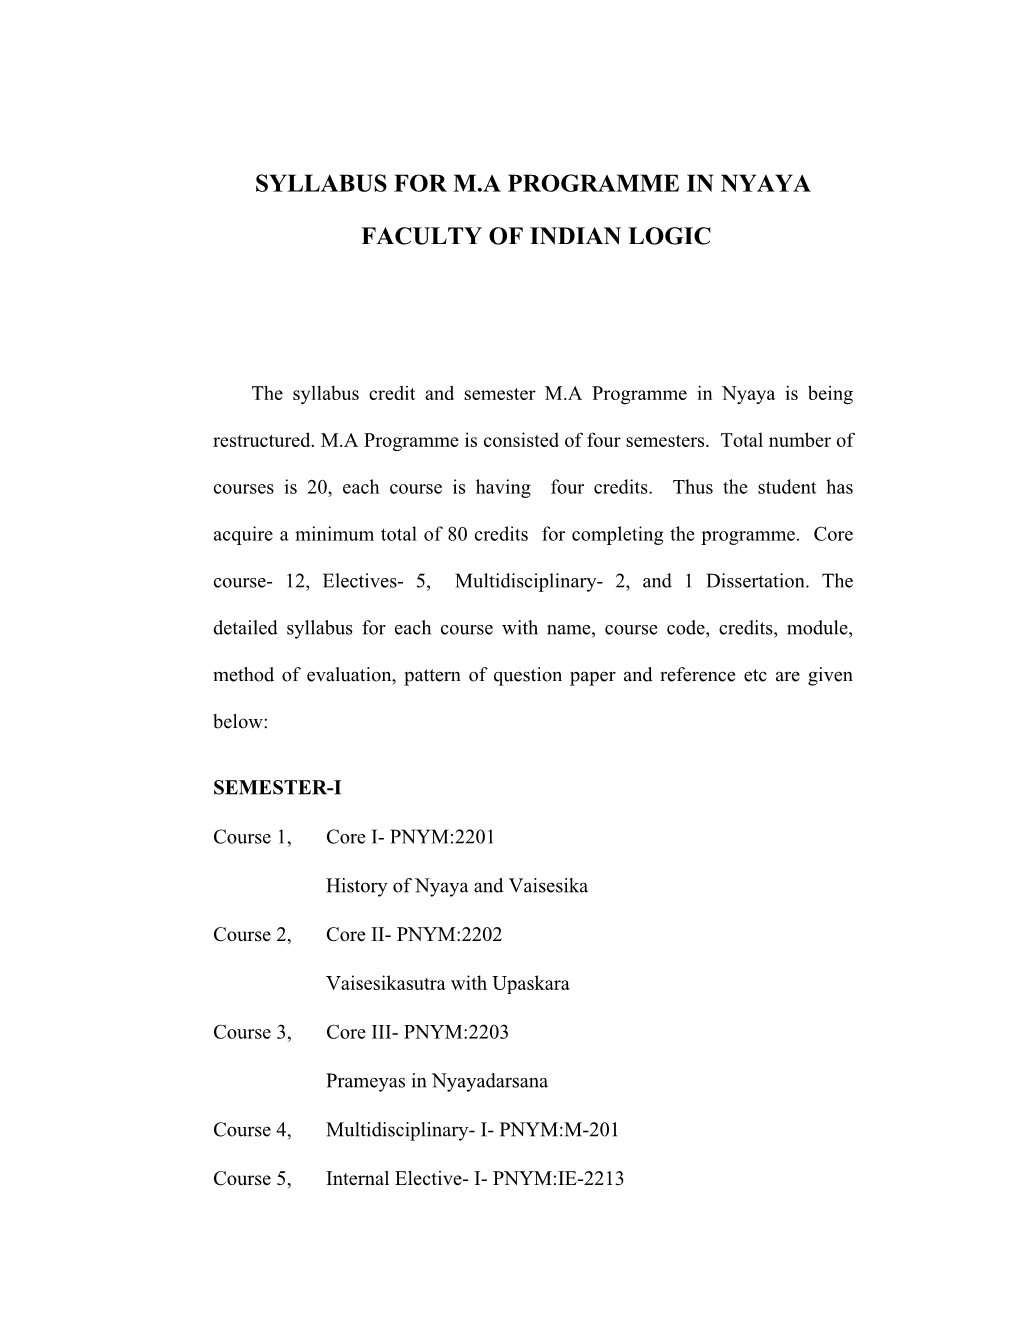 Syllabus for M.A Programme in Nyaya Faculty of Indian